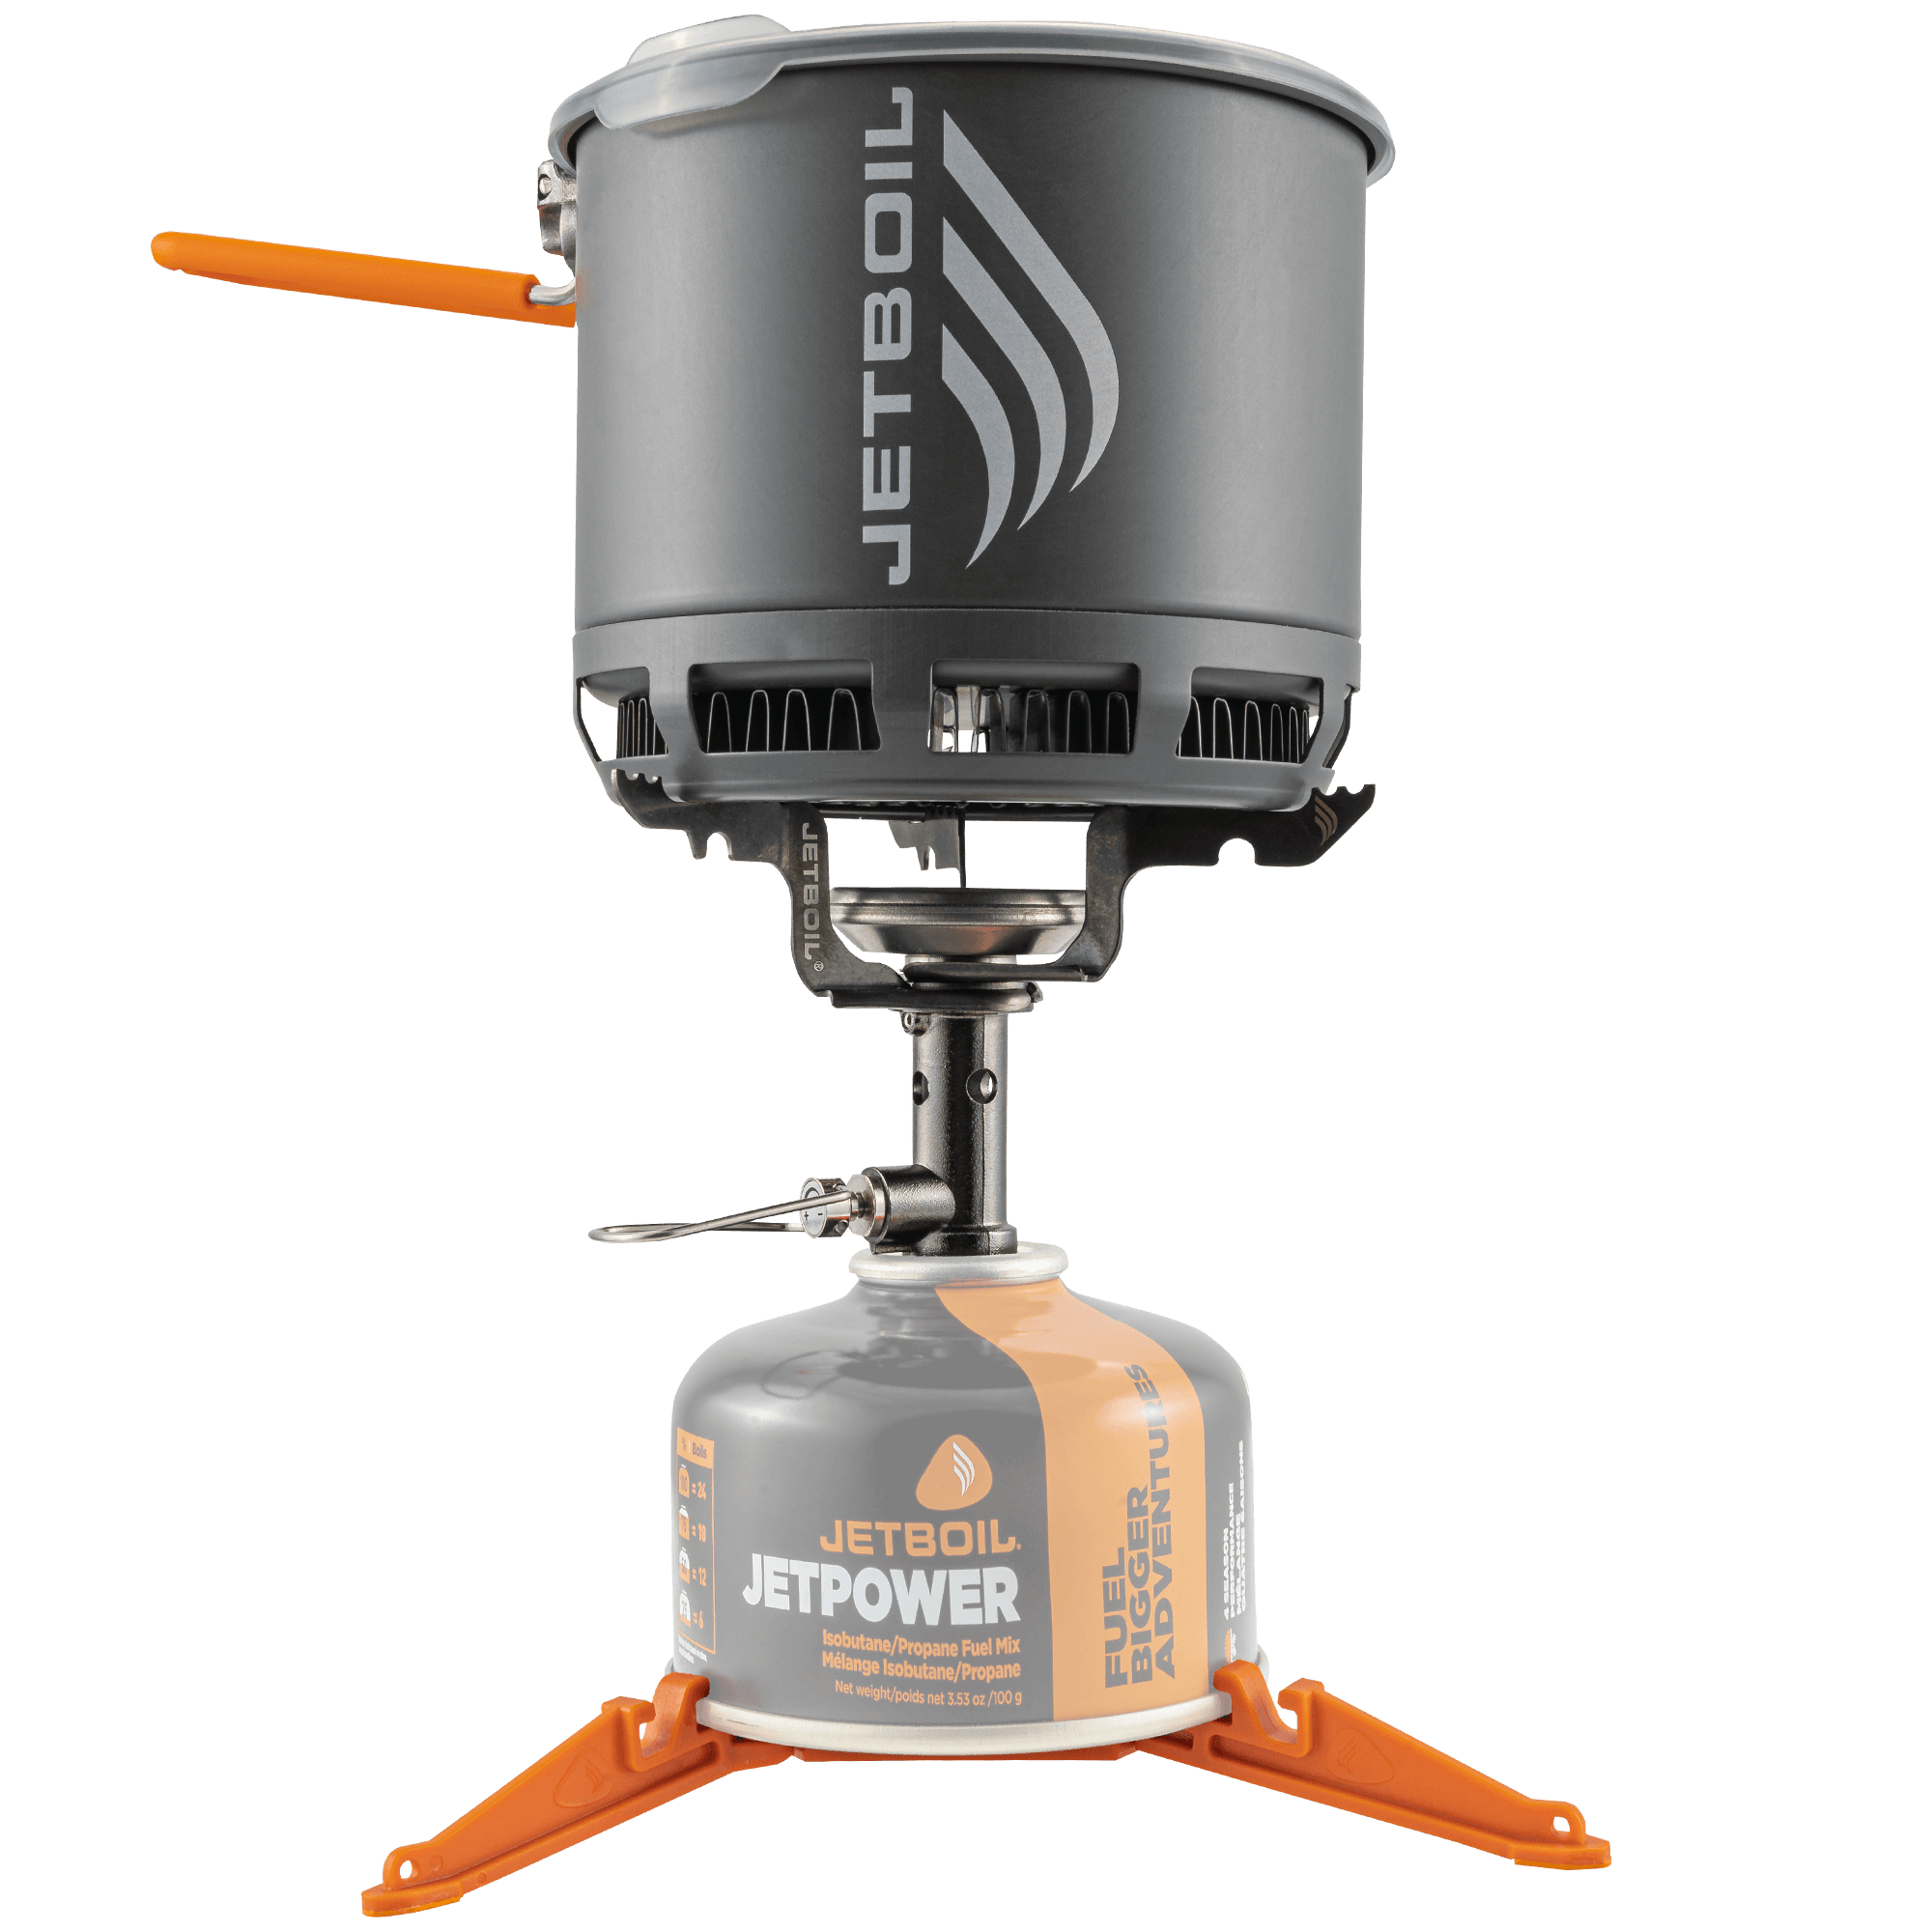 Flash Cooking System | Jetboil